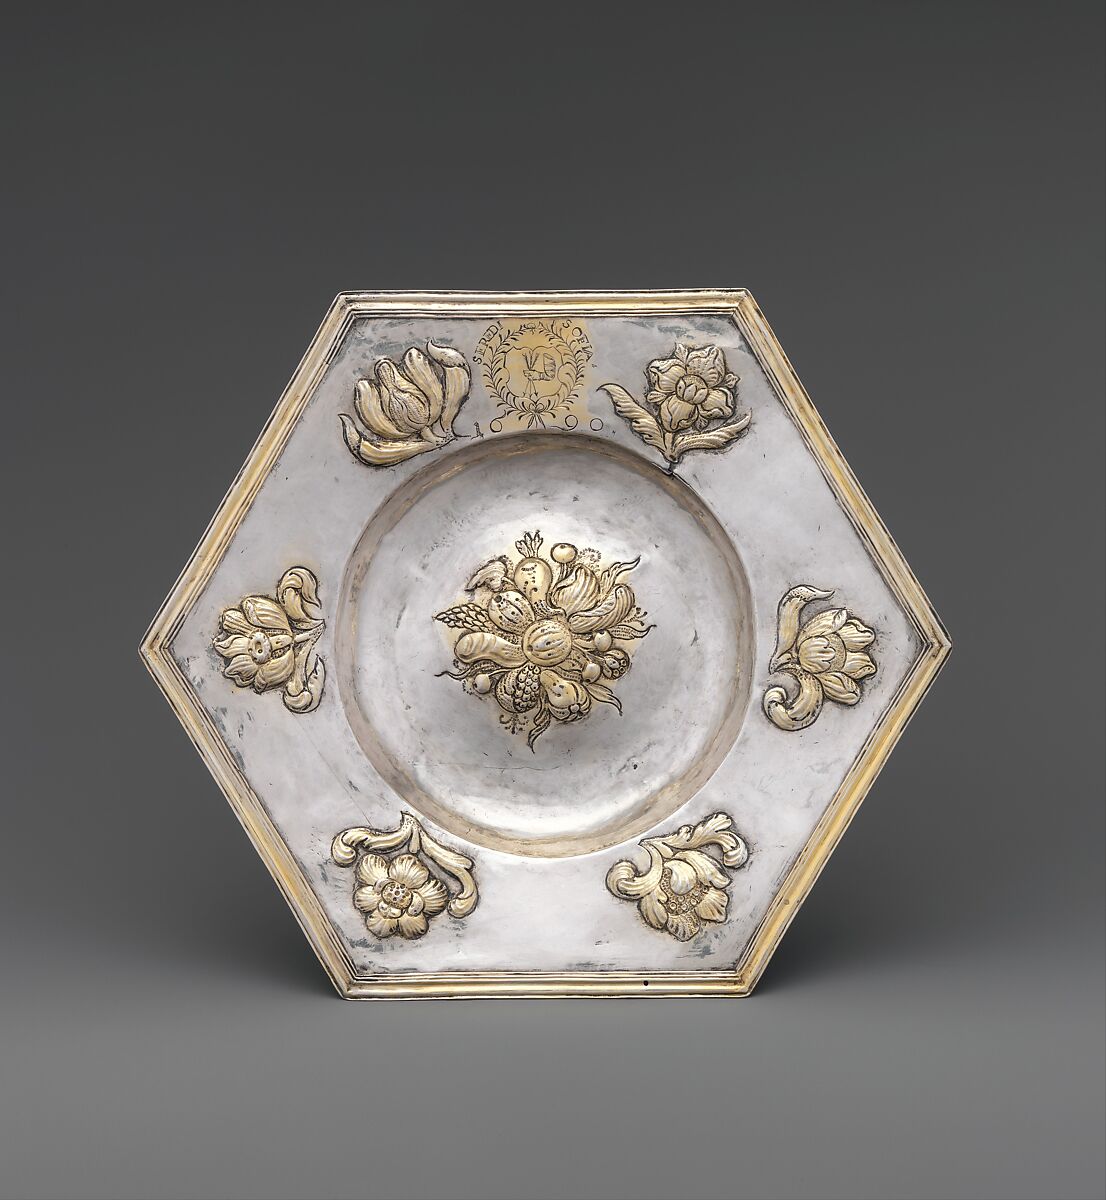 Dish (one of a pair), Silver, partly gilded, Hungarian, possibly Transylvania 